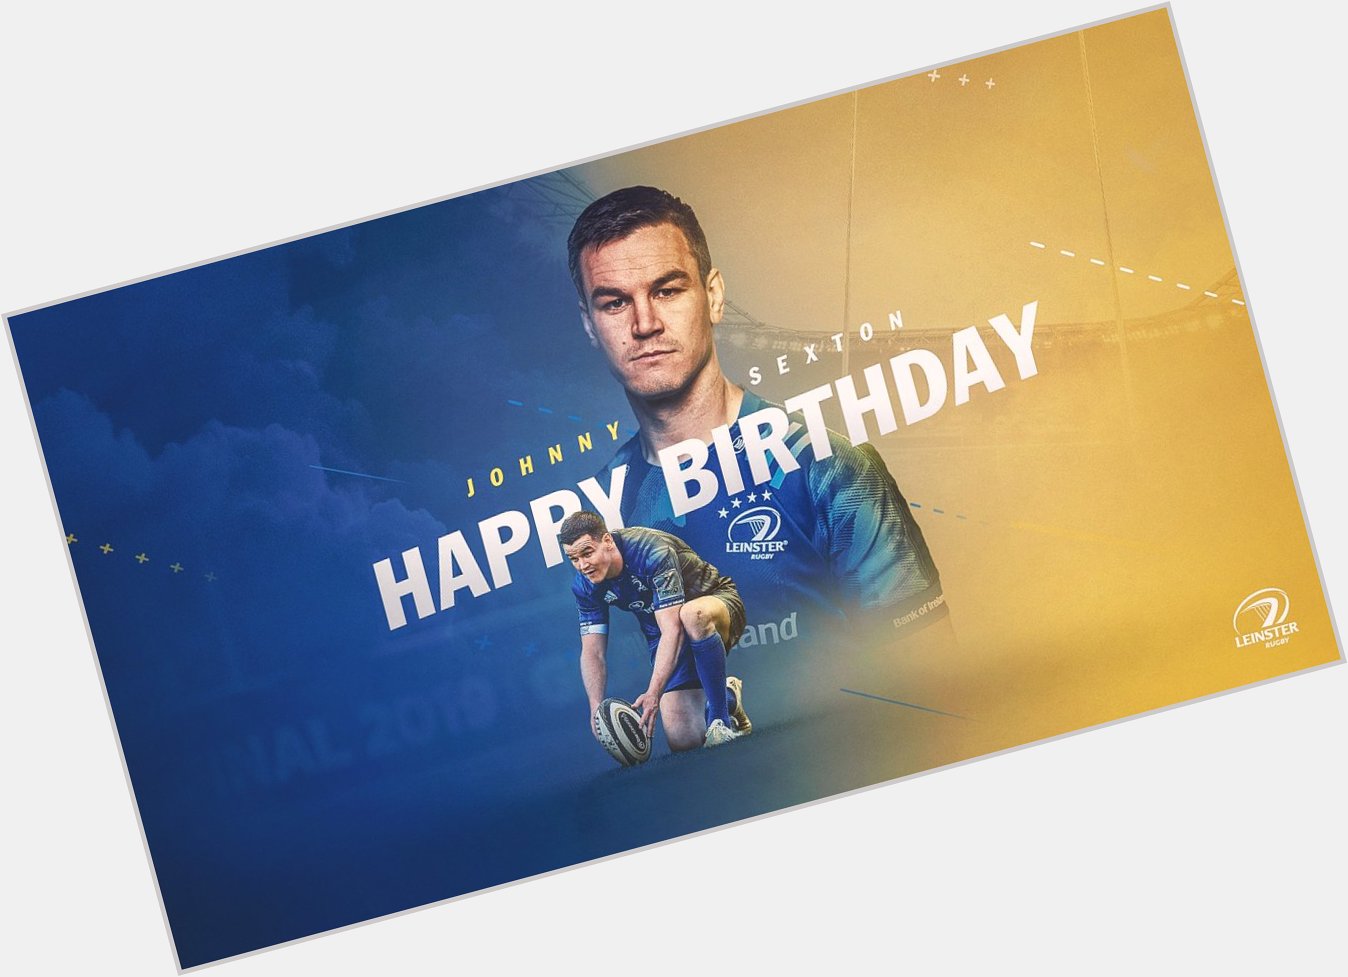 Happy birthday to the and legend Johnny Sexton  